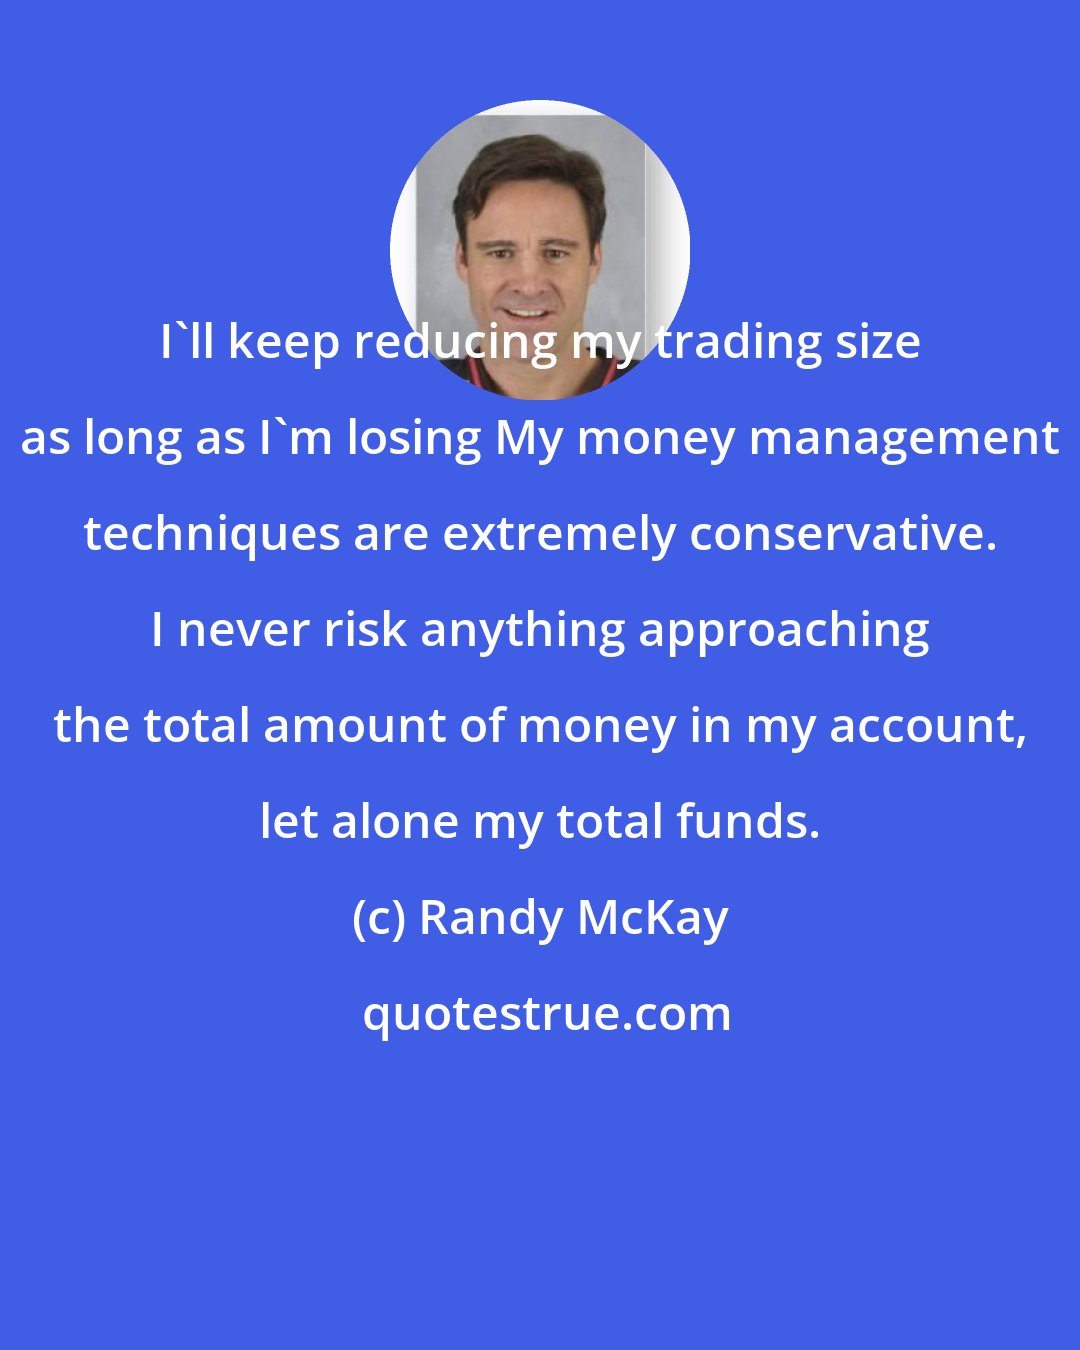 Randy McKay: I'll keep reducing my trading size as long as I'm losing My money management techniques are extremely conservative. I never risk anything approaching the total amount of money in my account, let alone my total funds.